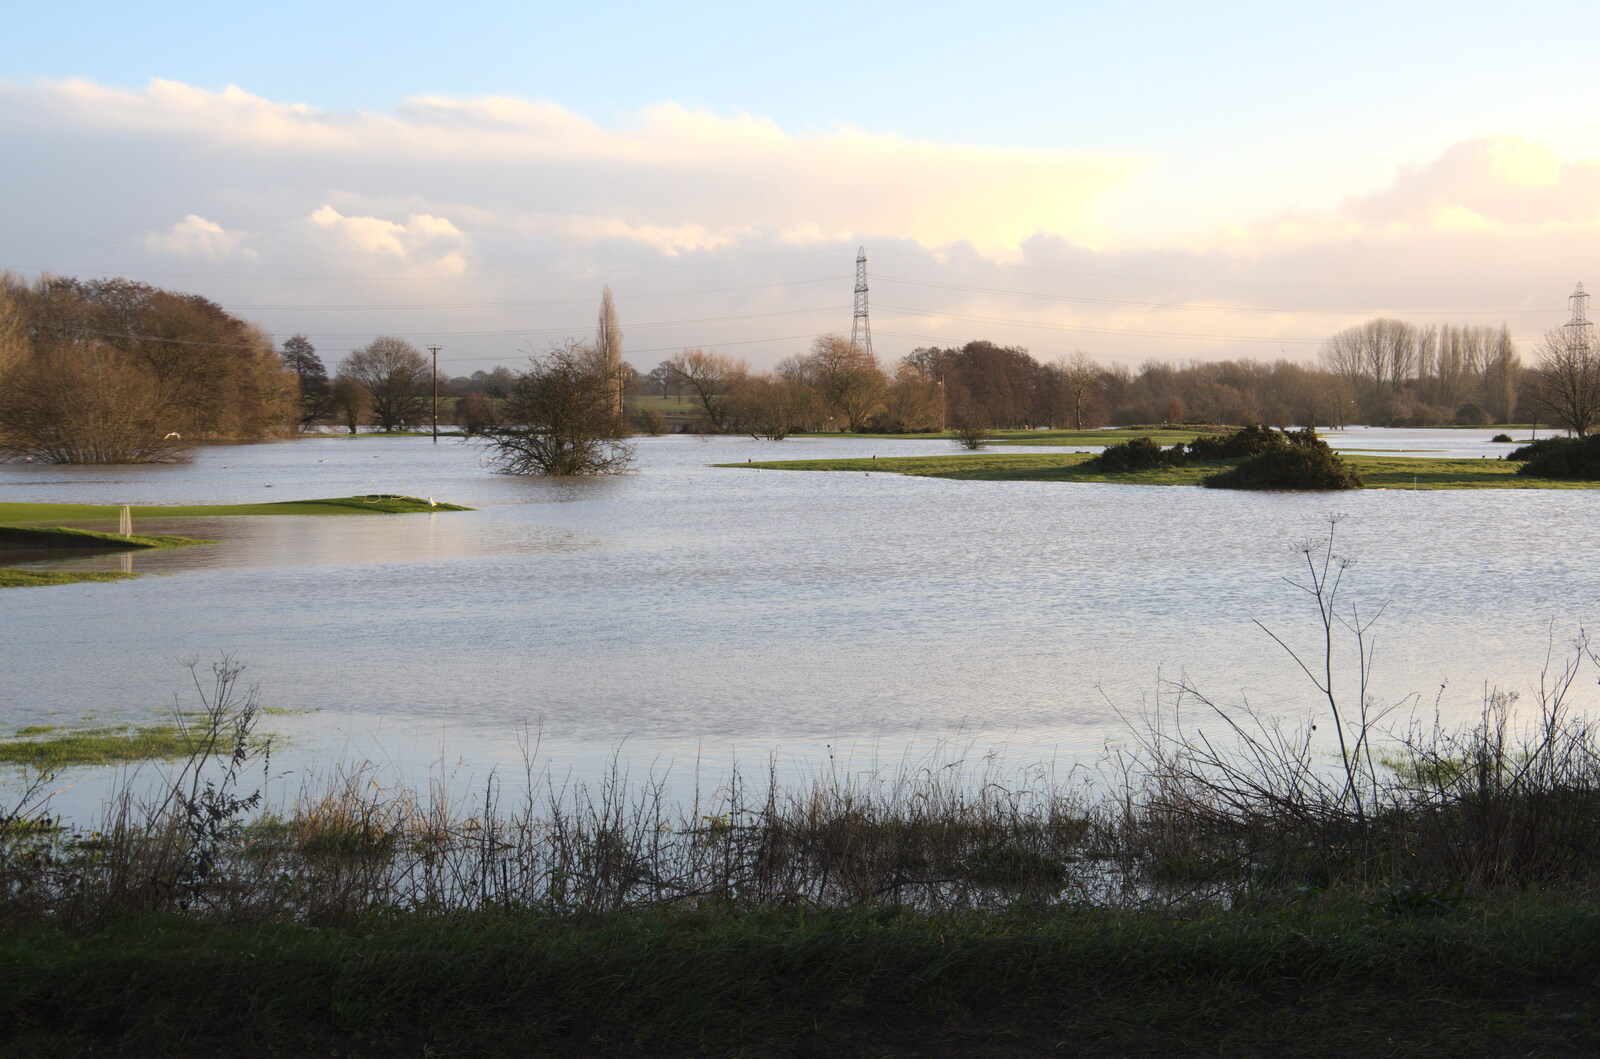 Large parts of the golf course are flooded from The Christmas Eve Floods, Diss, Norfolk - 24th December 2020